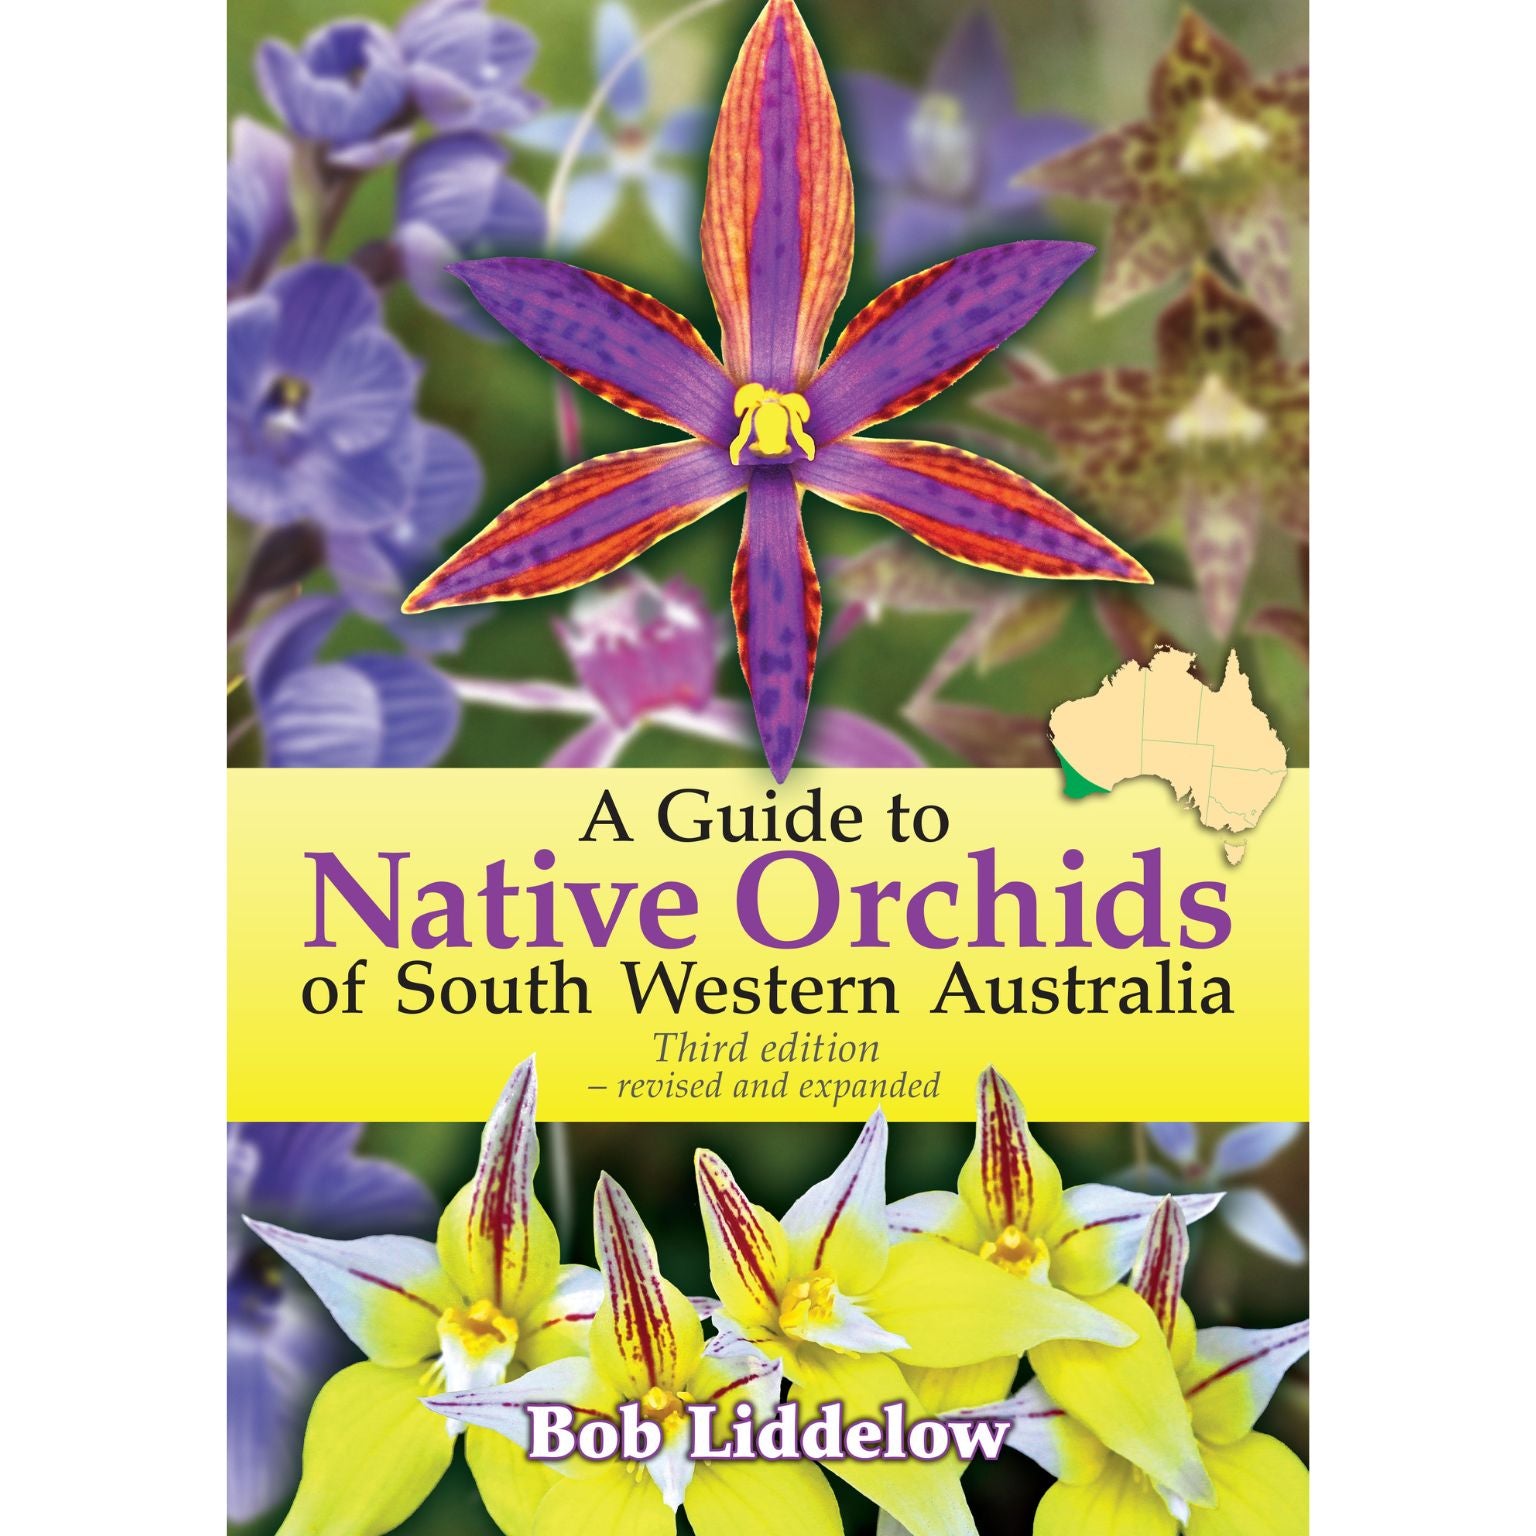 A Guide to Native Orchids of South Western Australia – Aspects of 